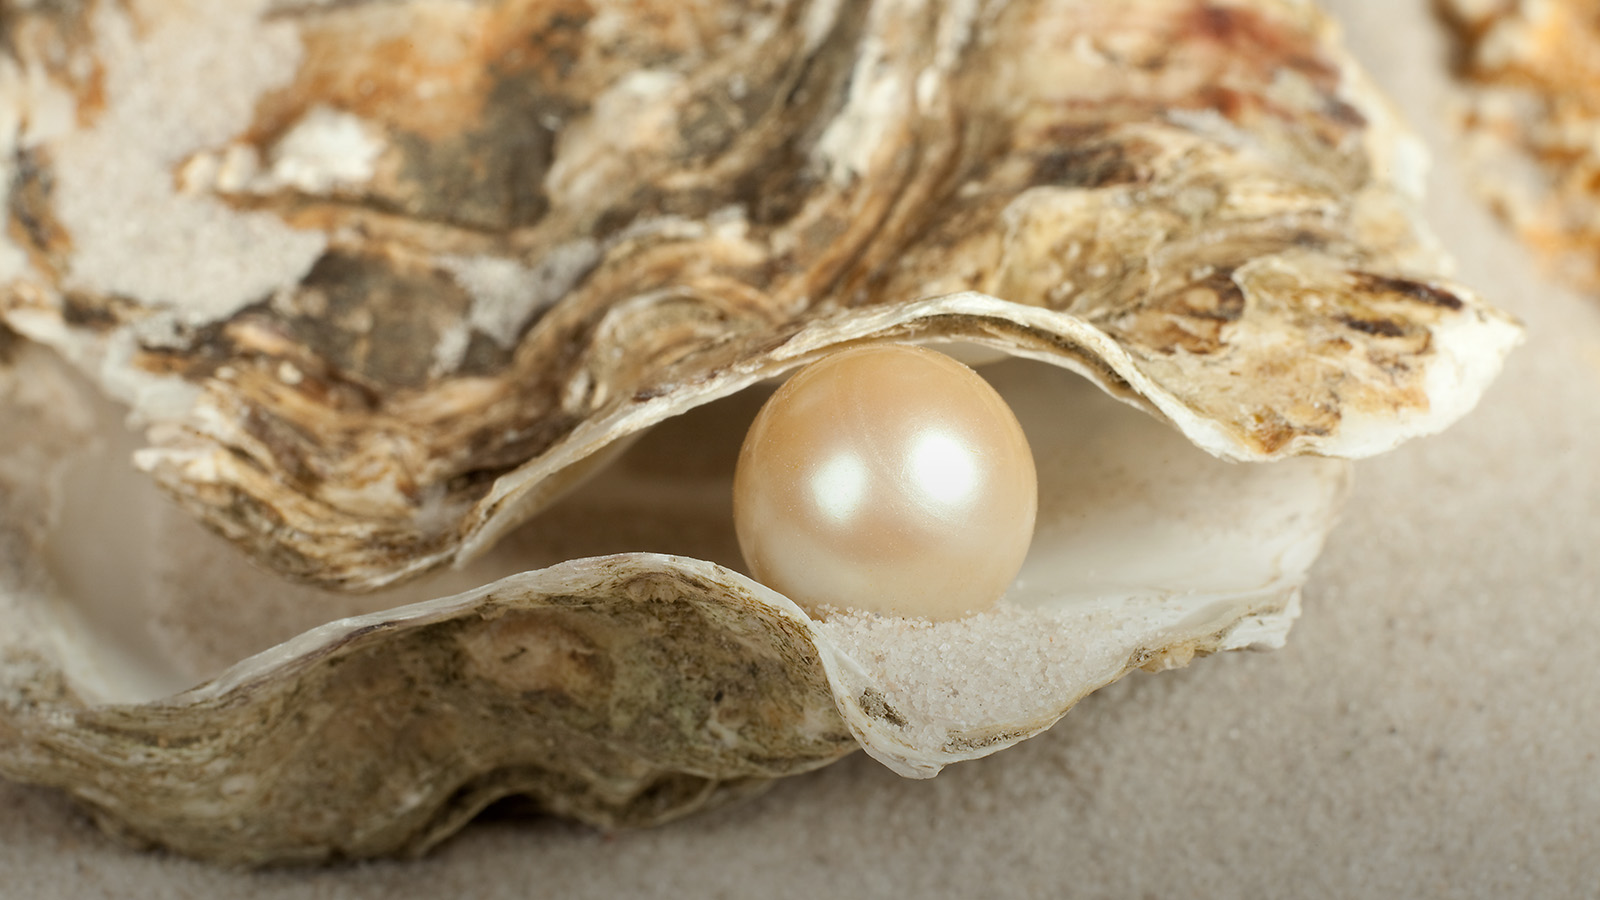 Discovery of Ancient Pearls That Are Very Valuable Today